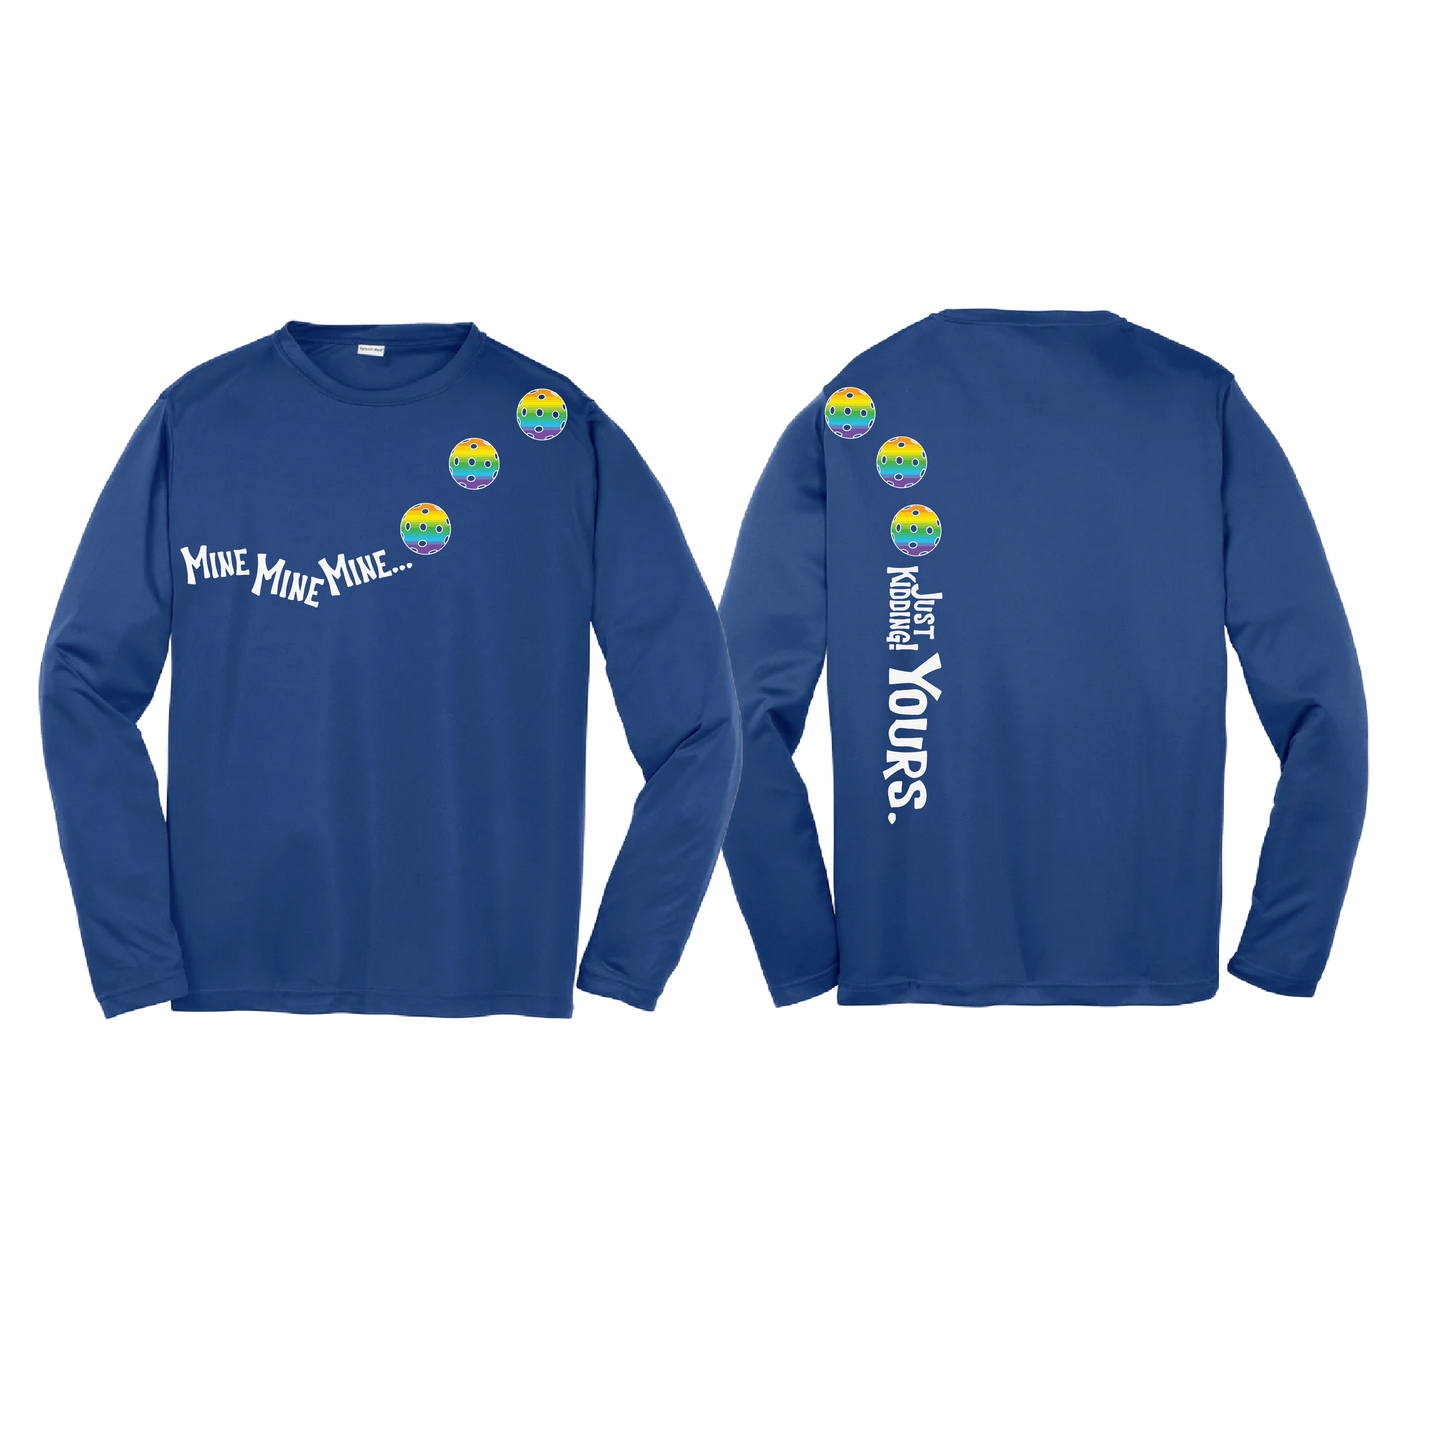 Mine Just Kidding Yours With Pickleballs (Purple Rainbow Pink) Customizable | Youth Long Sleeve Athletic Shirt | 100% Polyester